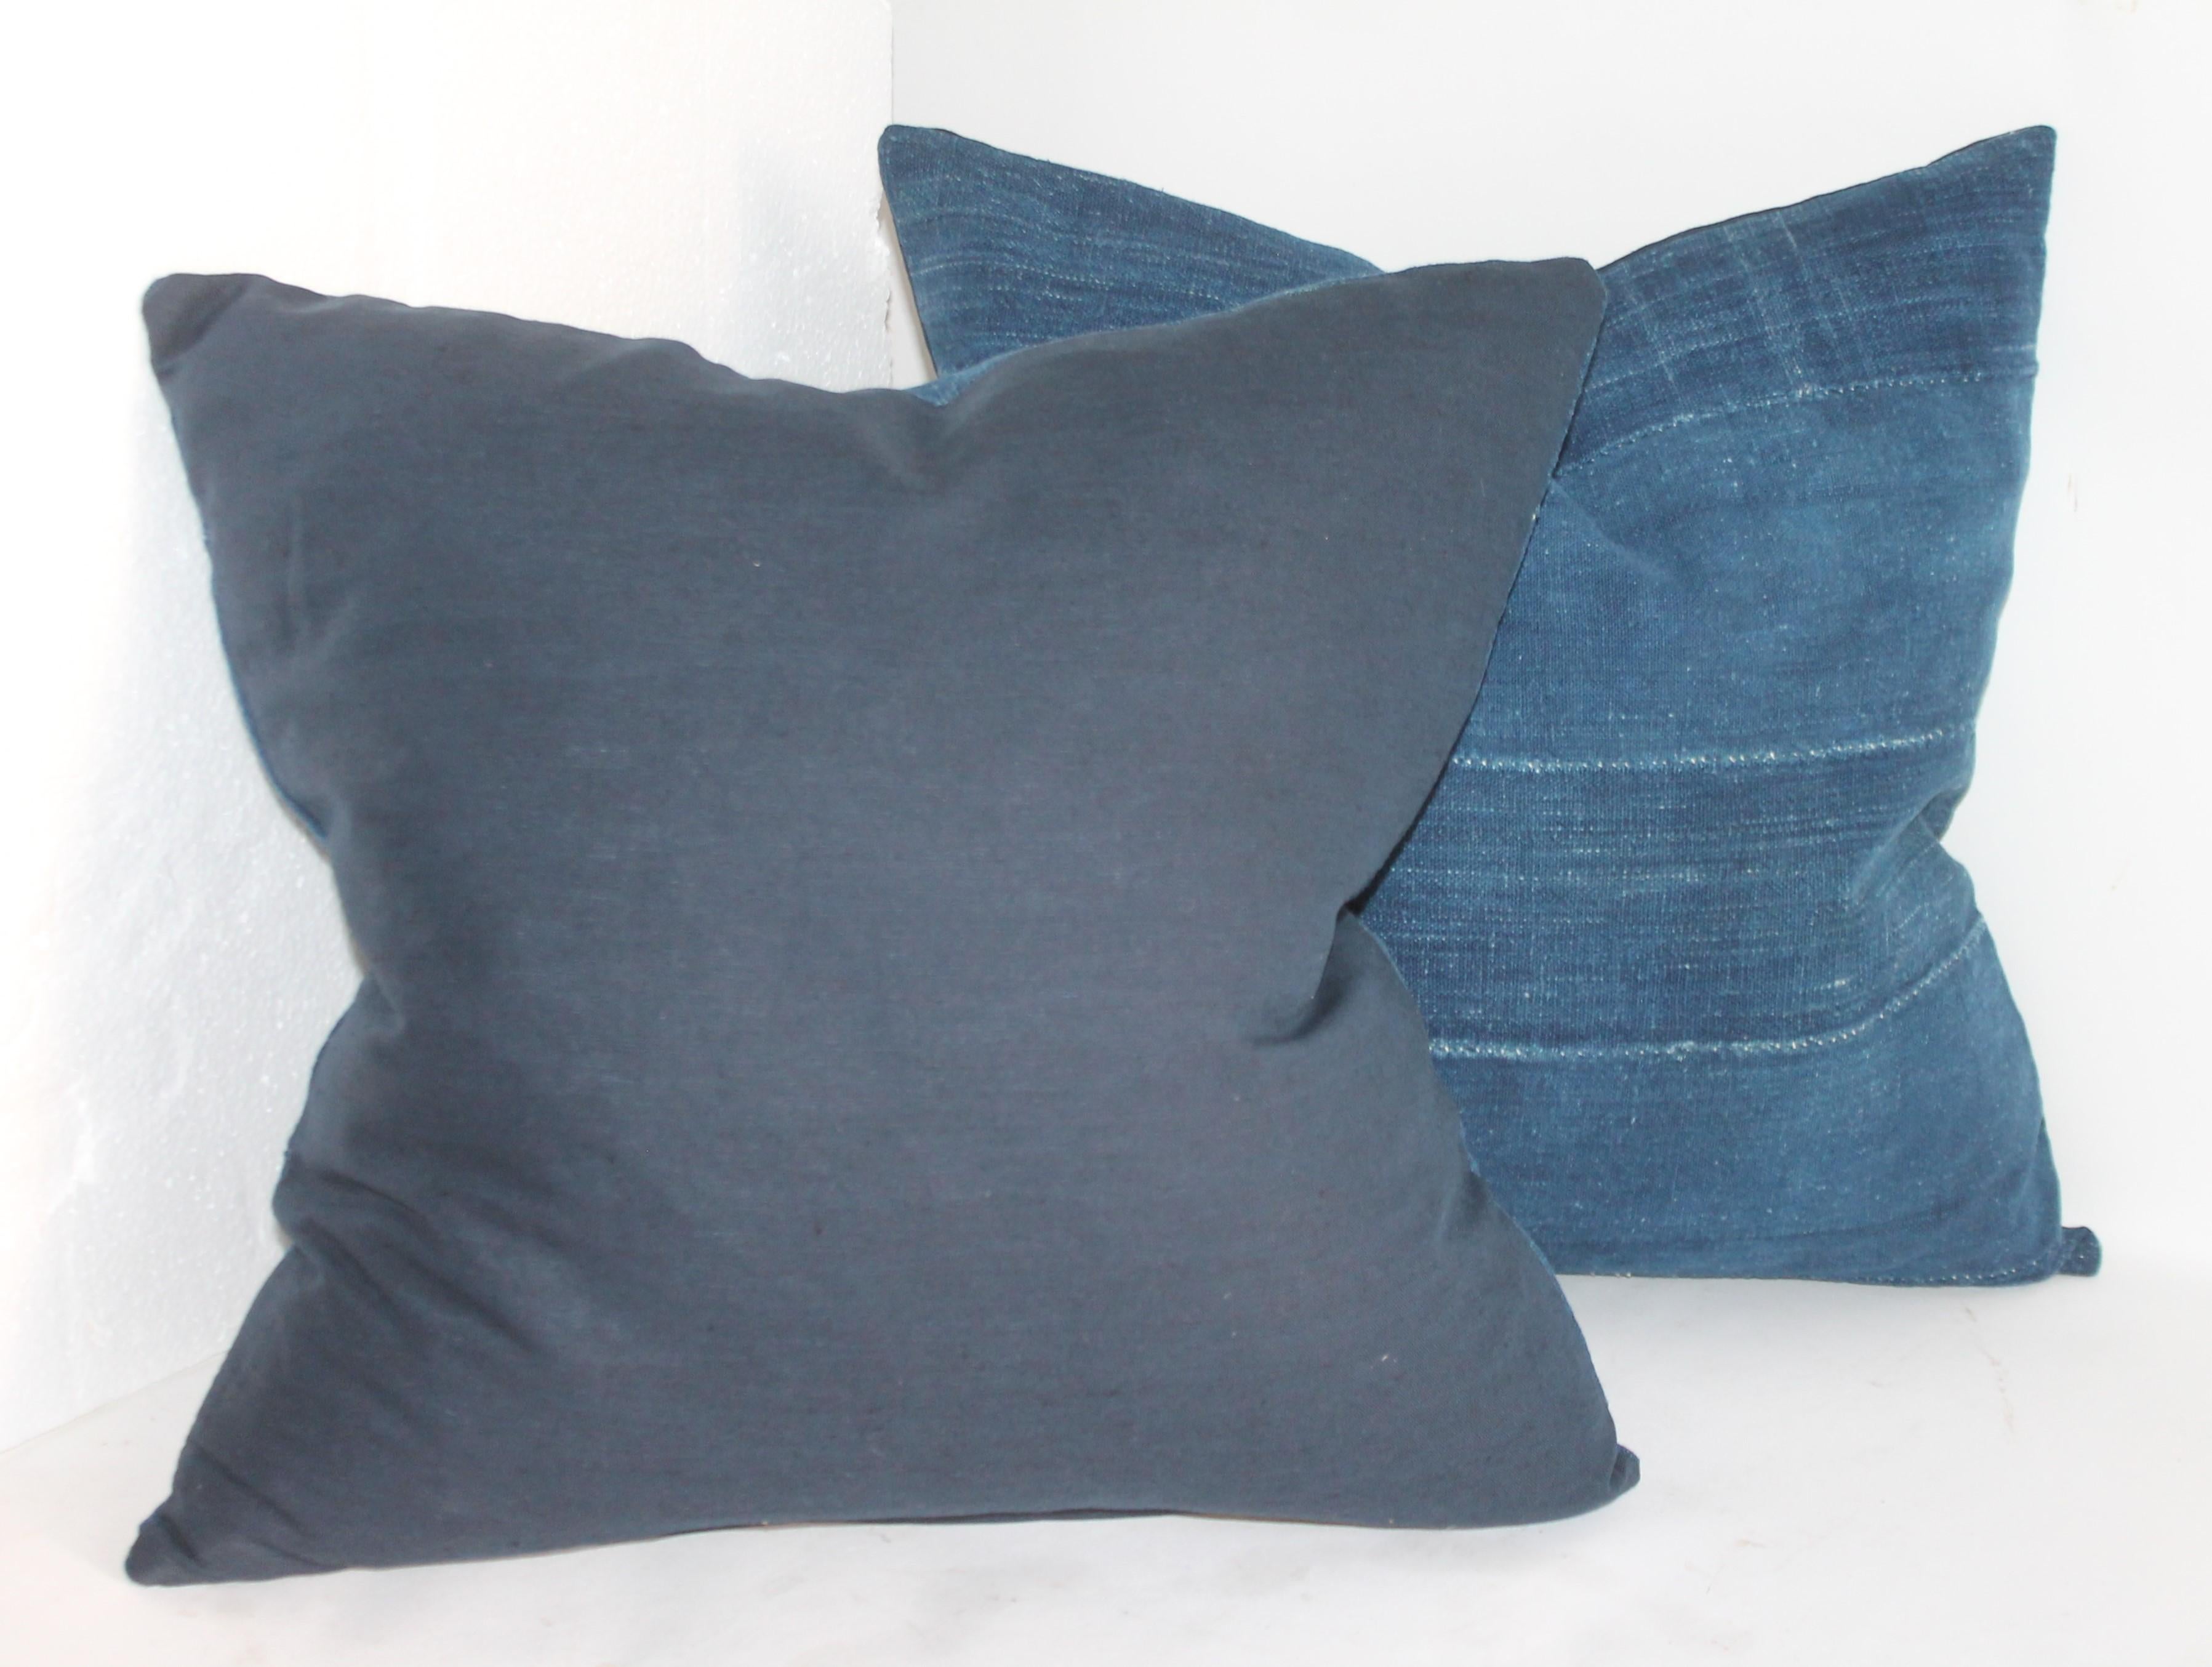 Collection of three indigo blue homespun linen pillows. The backings are in indigo blue linen and down and feather fill. Selling as a group of three.